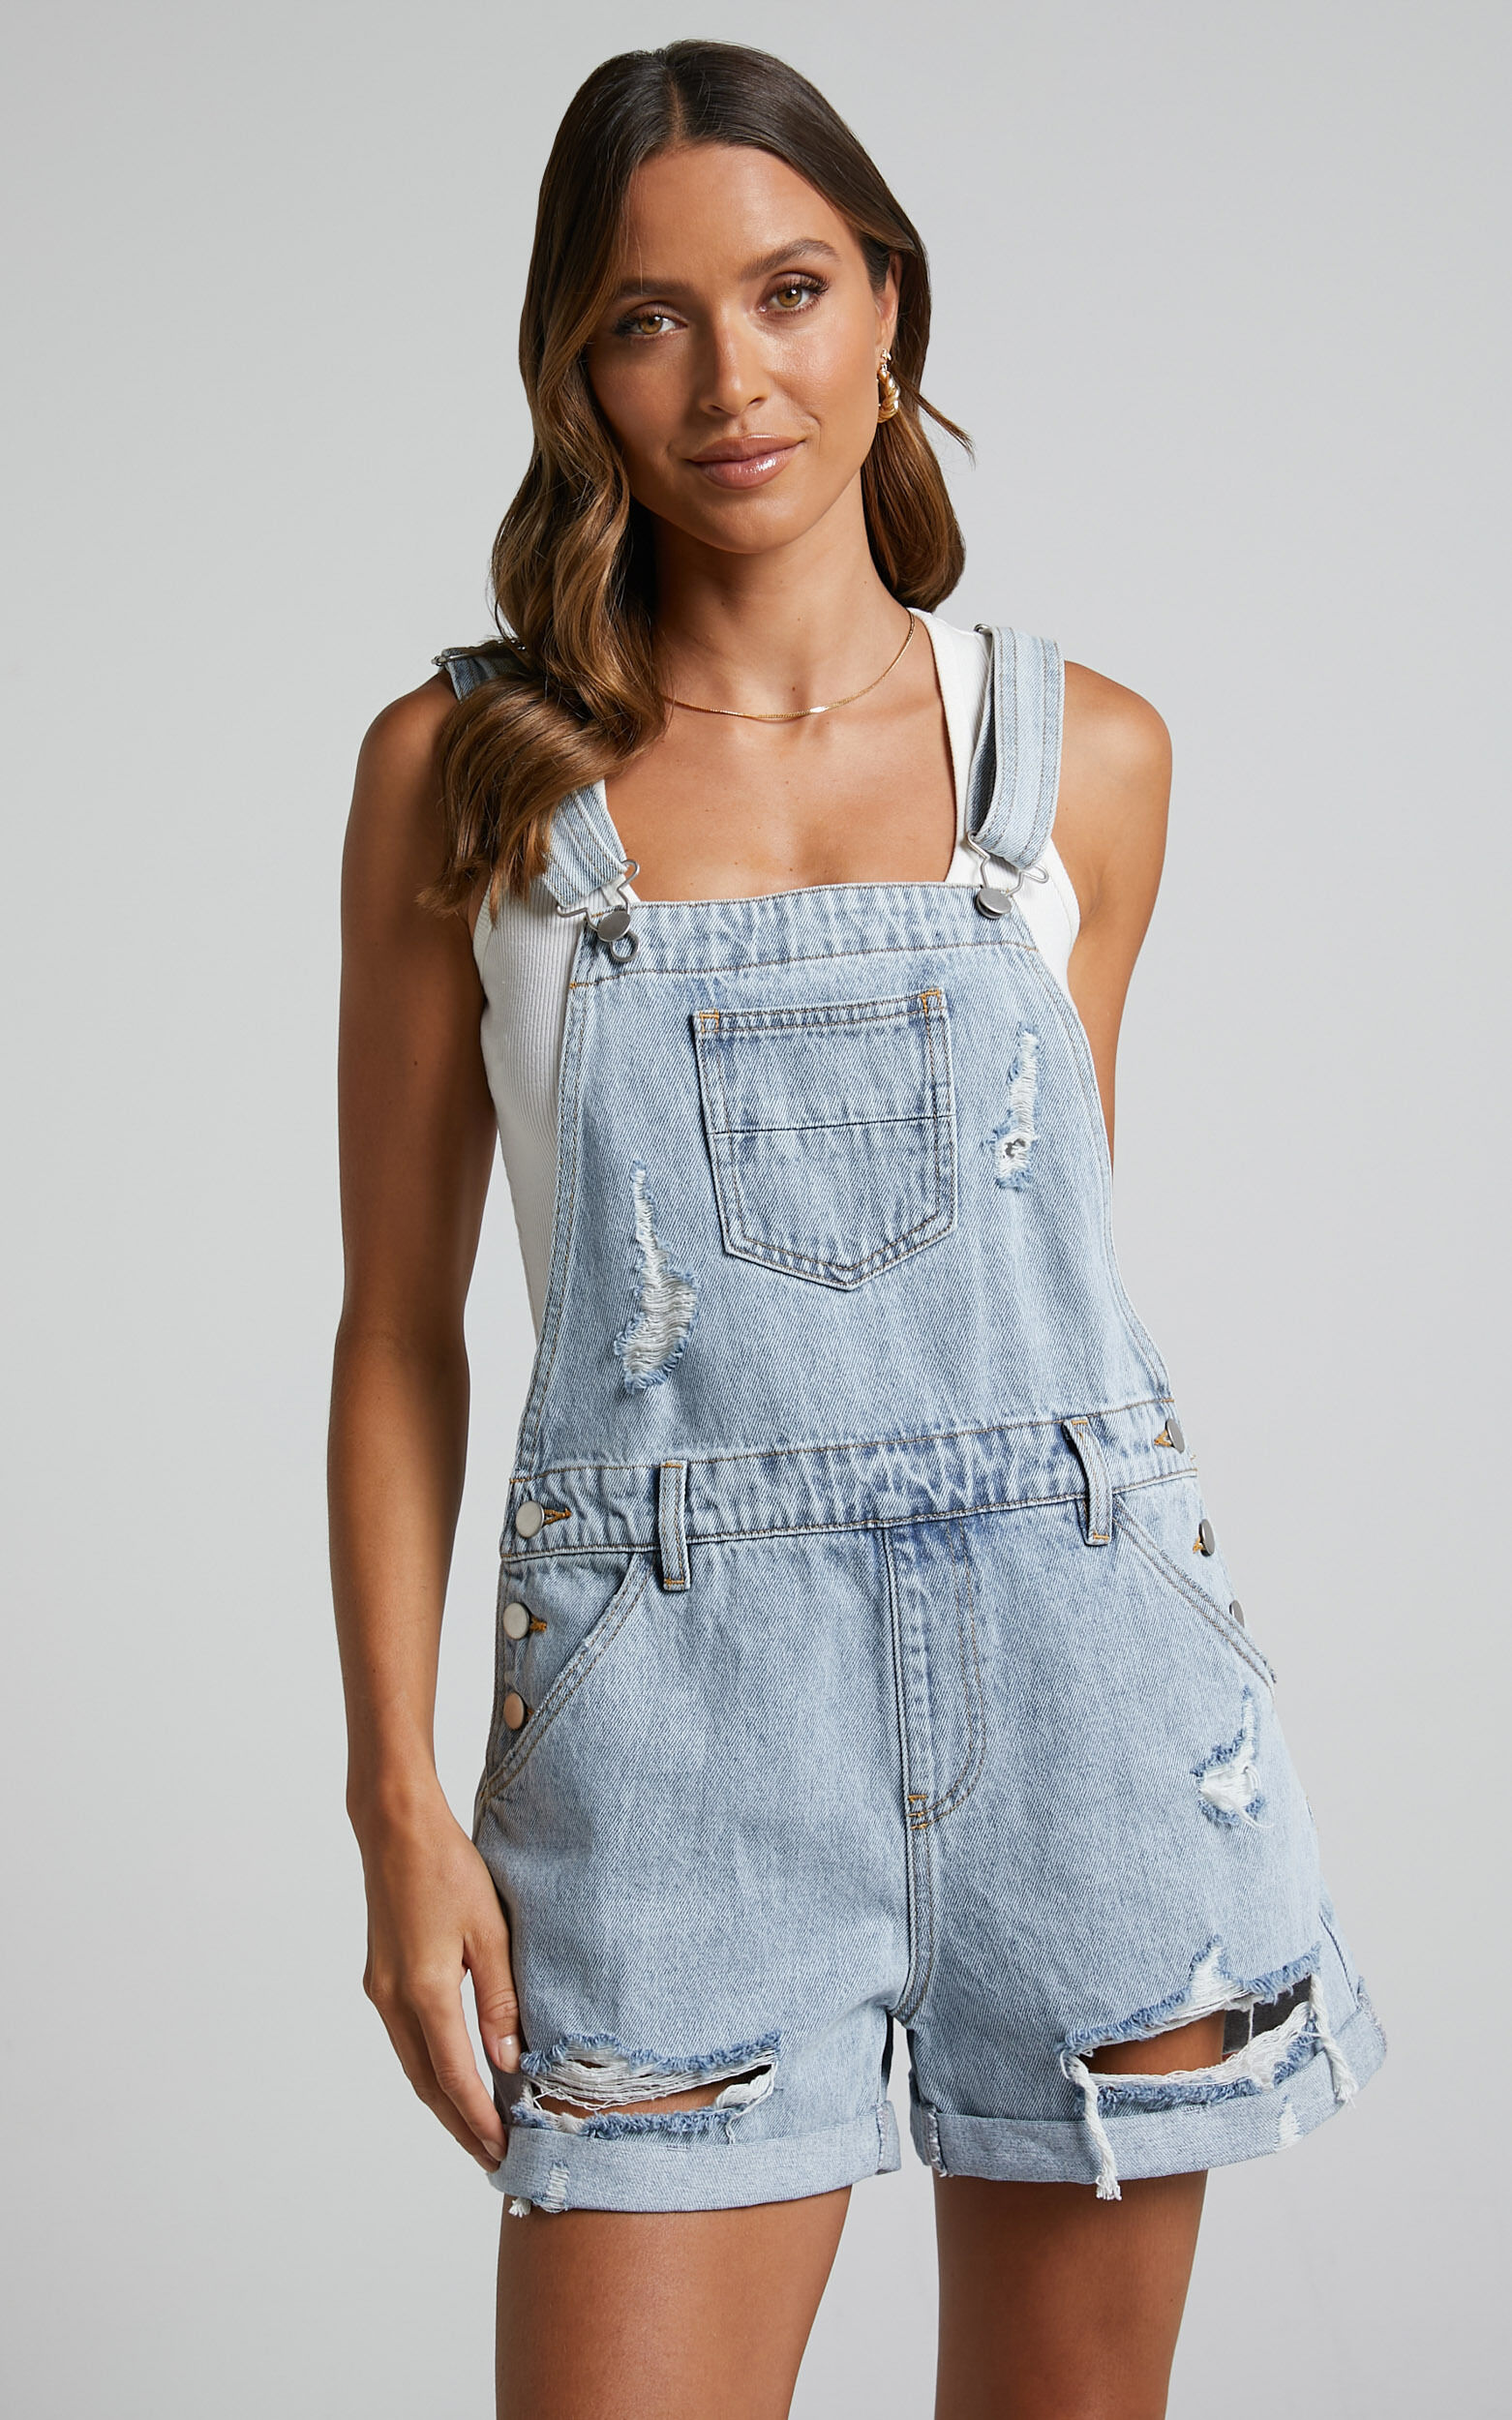 Rheana Overalls - Recycled Cotton Denim Short Overalls in Mid Blue Wash - 06, BLU1, super-hi-res image number null